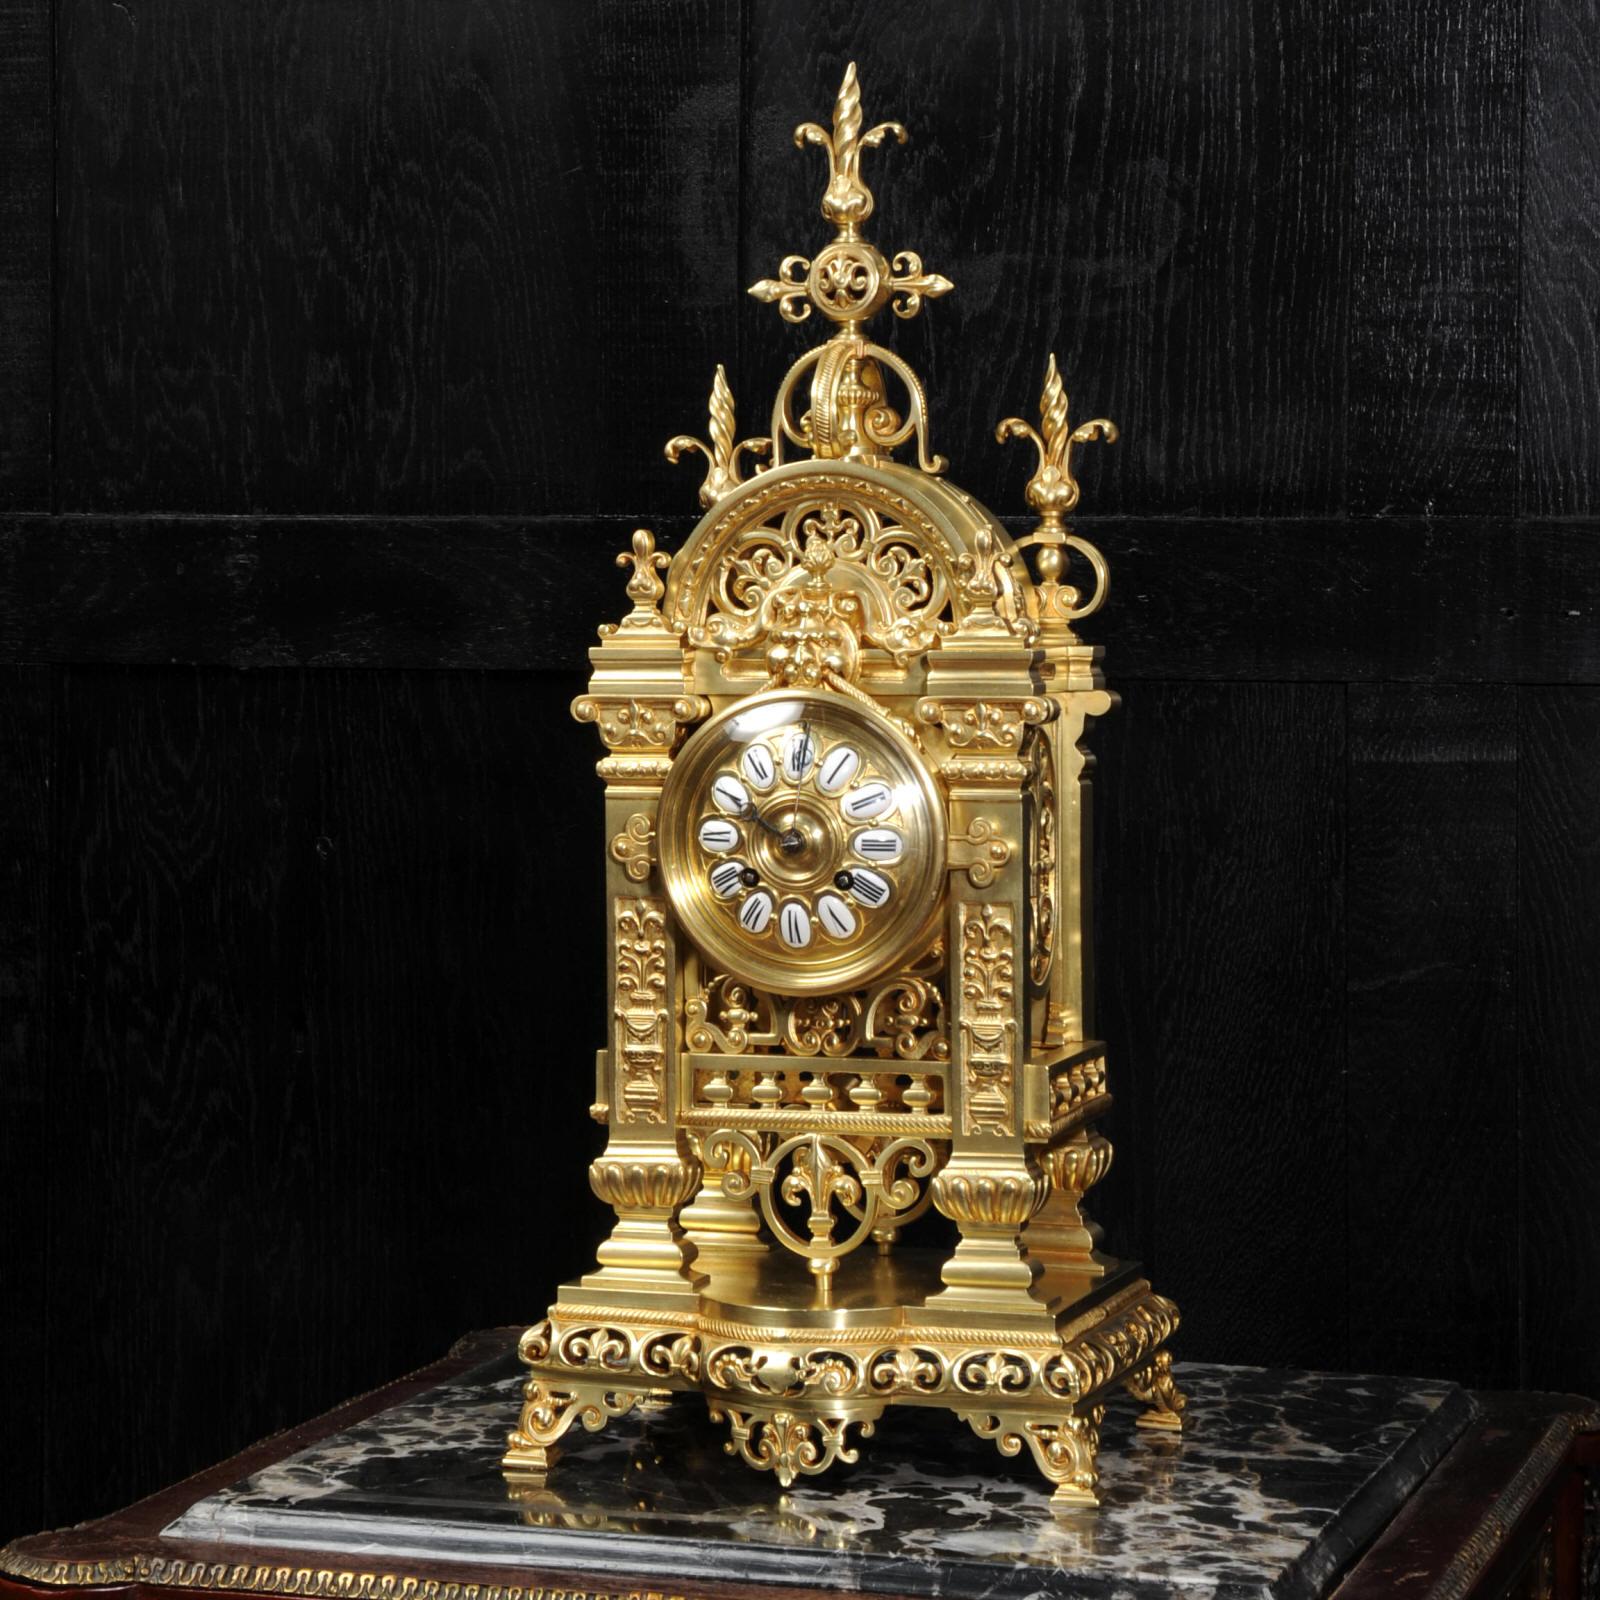 A superb antique French clock by Japy Frères, circa 1870. It is very well made in gilt bronze in the Gothic style. The case is architecturally formed of 4 gothic columns supporting fretted tracery panels allowing the pendulum to be seen gently